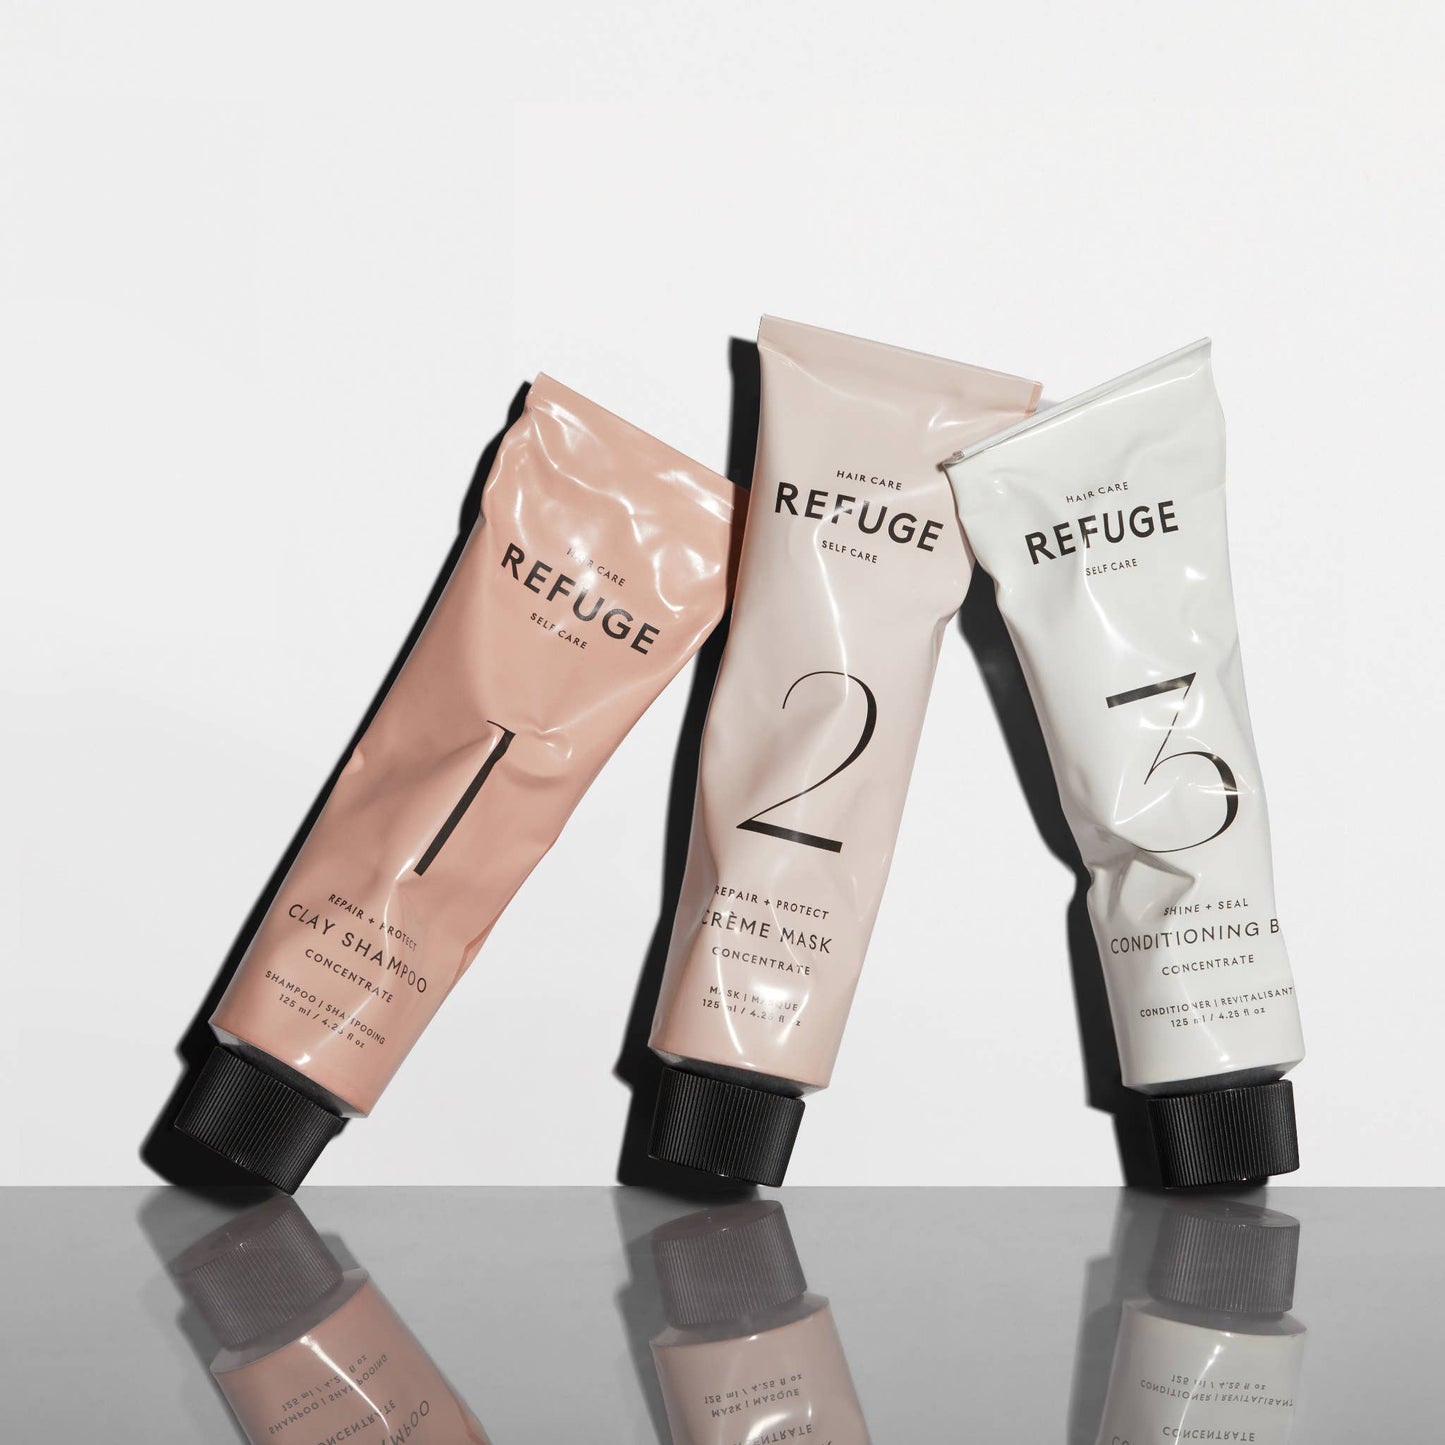 Trio of REFUGE Hair Care products angled on a reflective surface, emphasizing their sleek packaging design - Wellaine